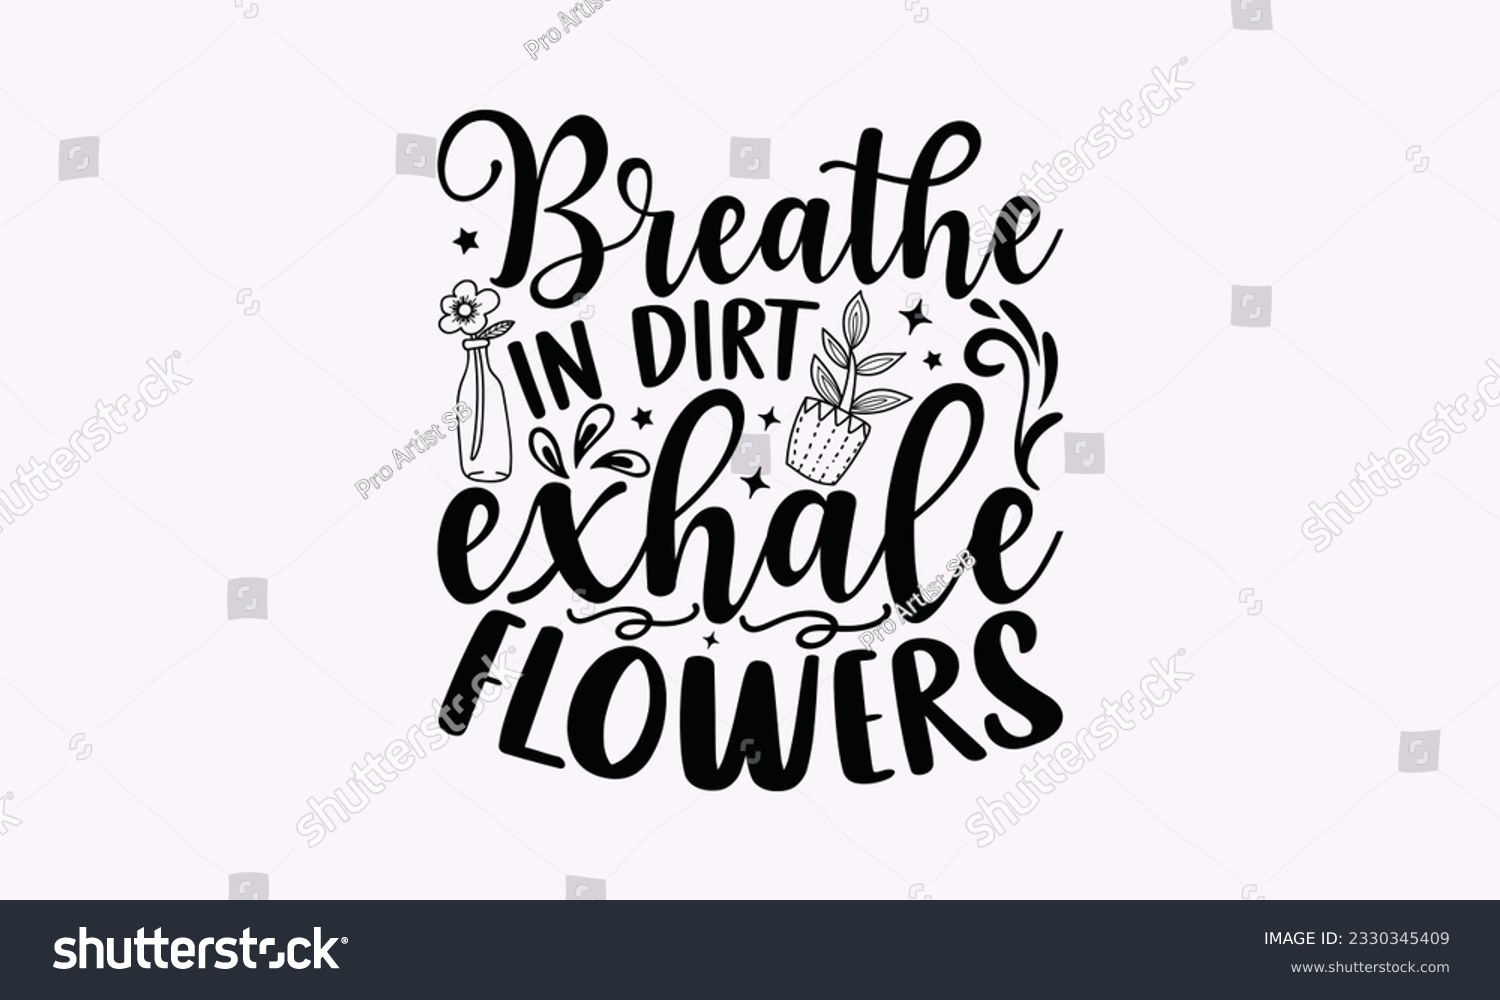 SVG of Breathe in dirt exhale flowers - Gardening SVG Design, Flower Quotes, Calligraphy graphic design, Typography poster with old style camera and quote. svg